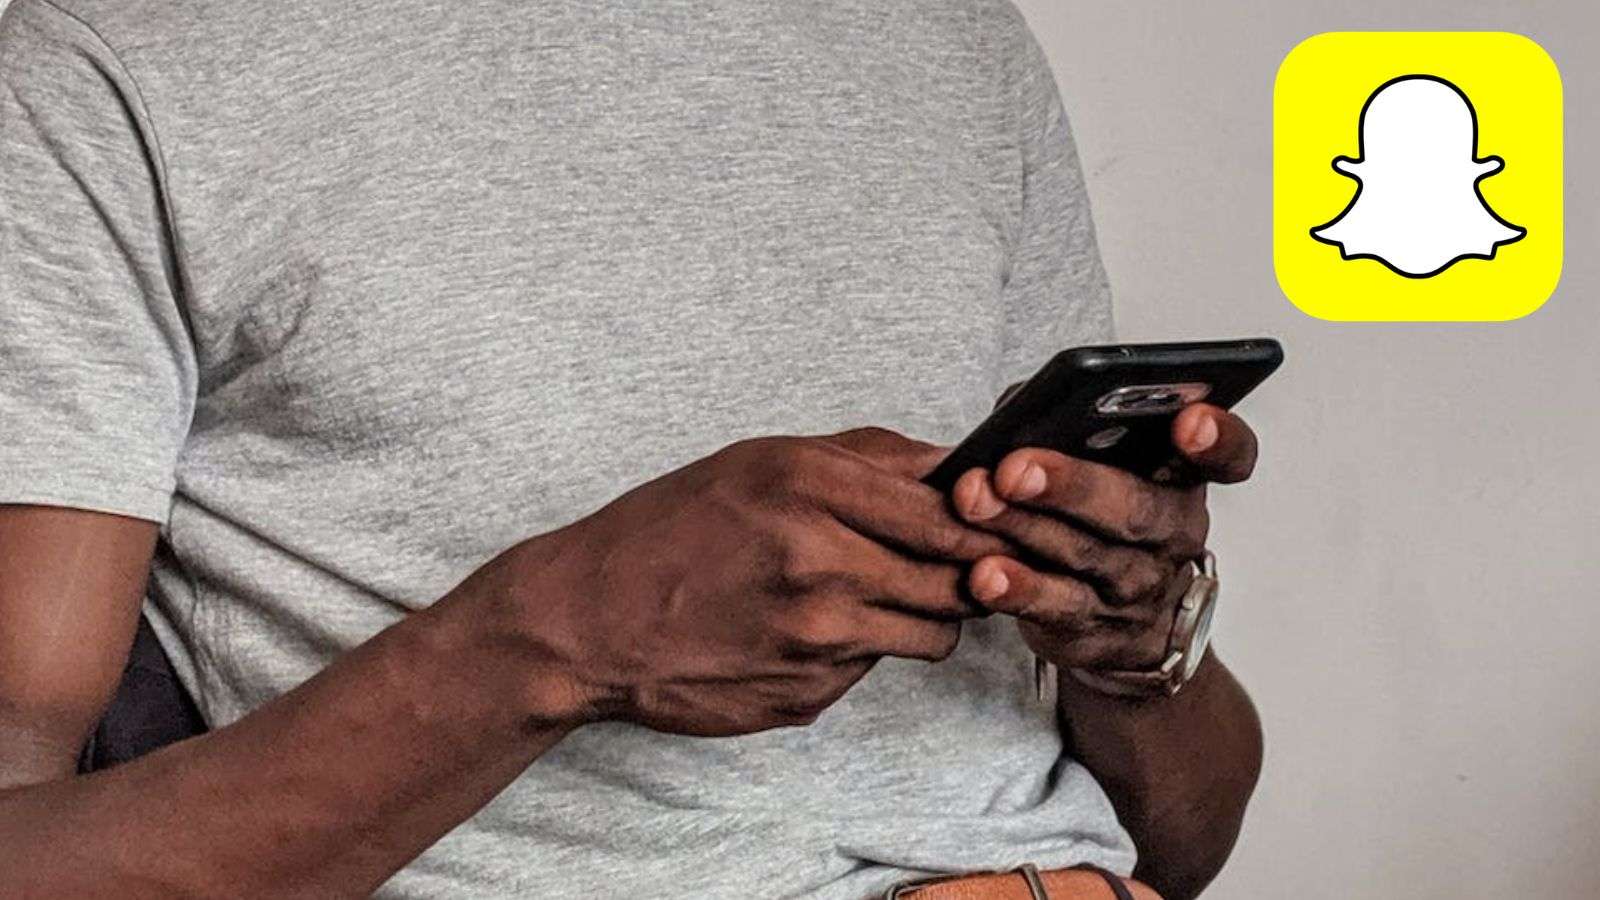 Snapchat logo next to person holding phone.